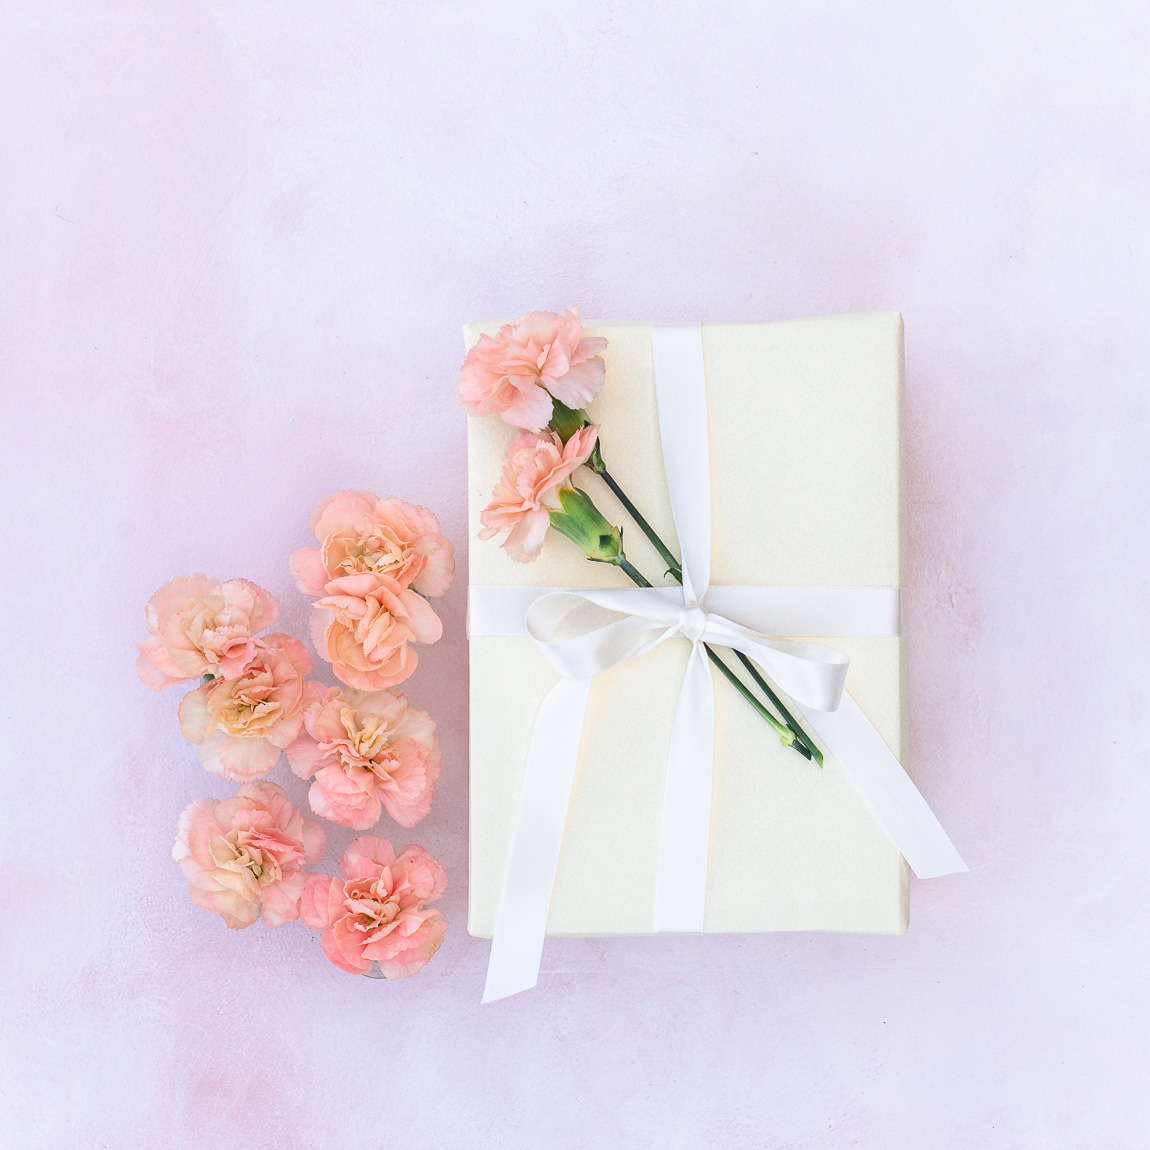 Gift wrapped with flower